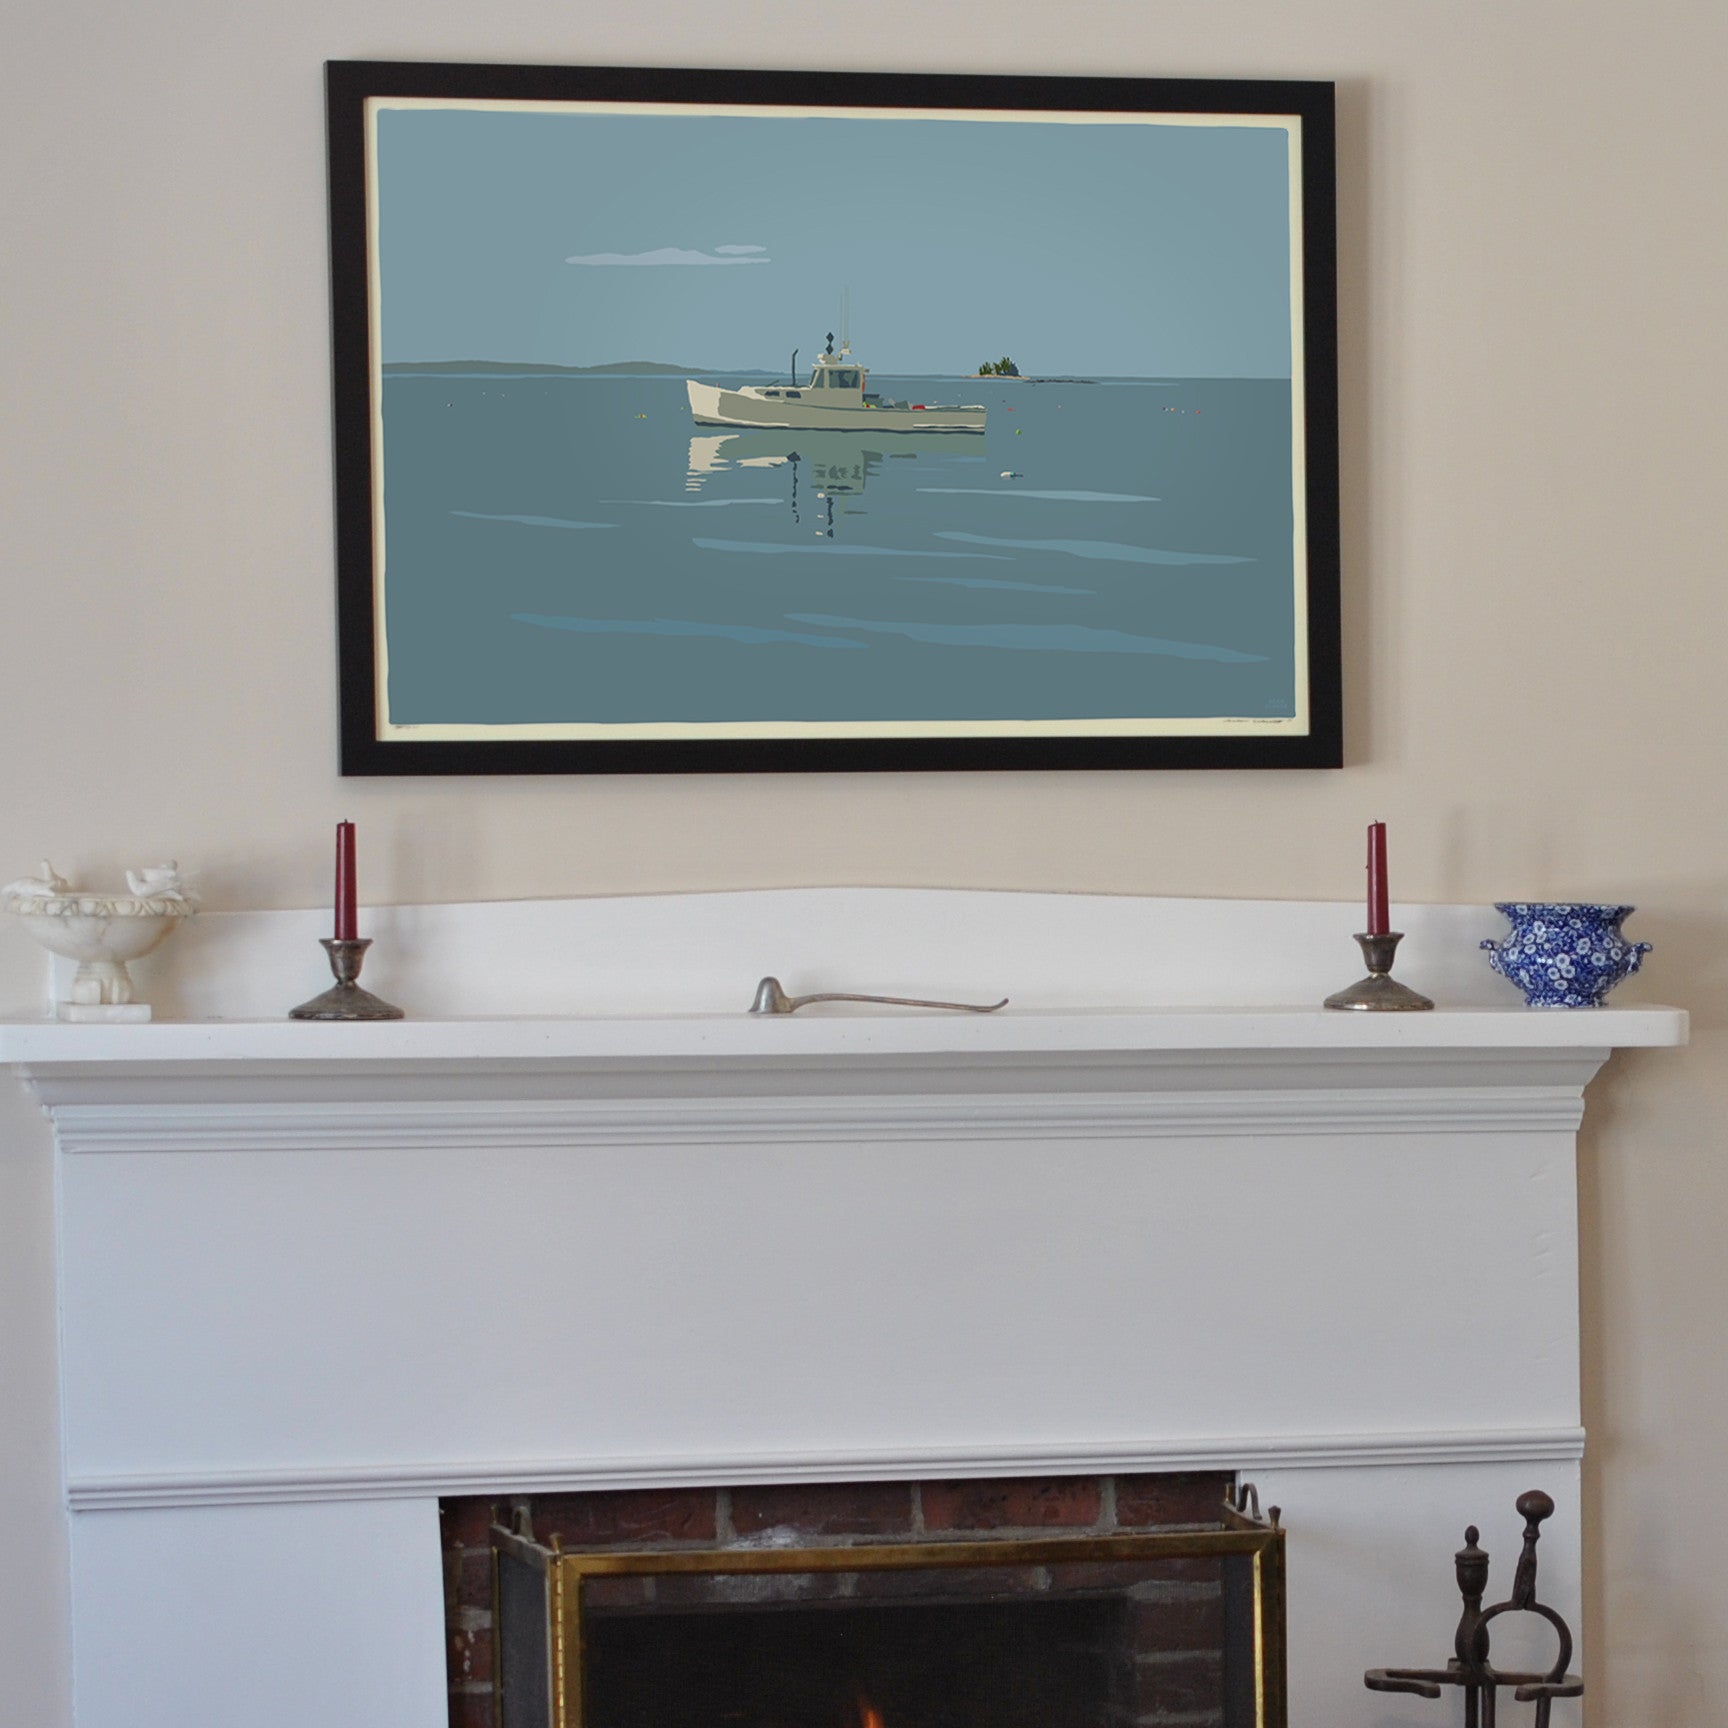 Tranquility Lobster Boat Art Print 24" x 36" Framed Travel Poster By Alan Claude - Maine